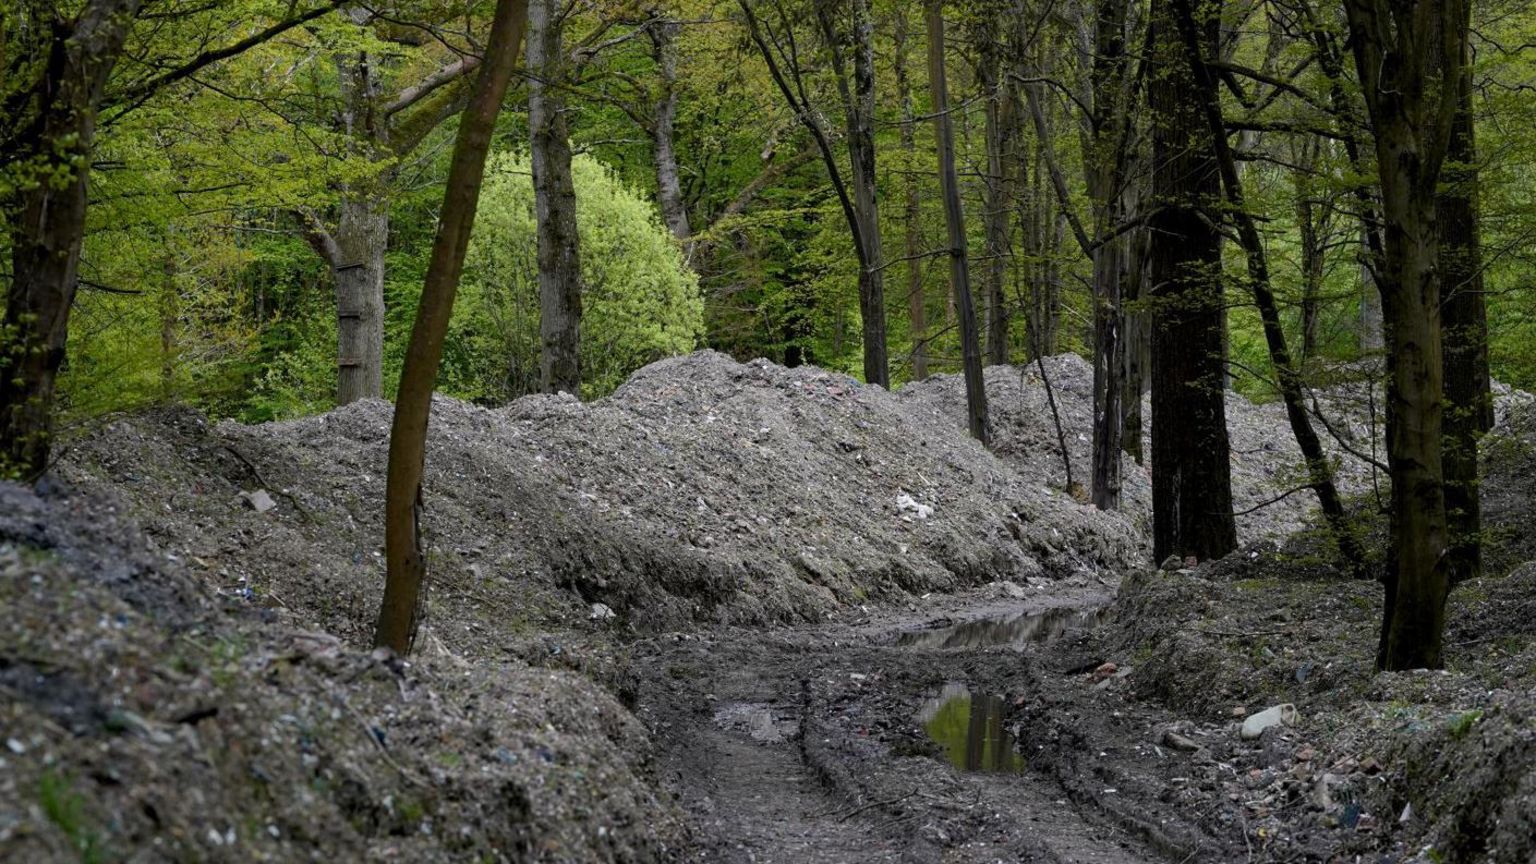 Mountains of waste piled against trees in the centre of a woodland